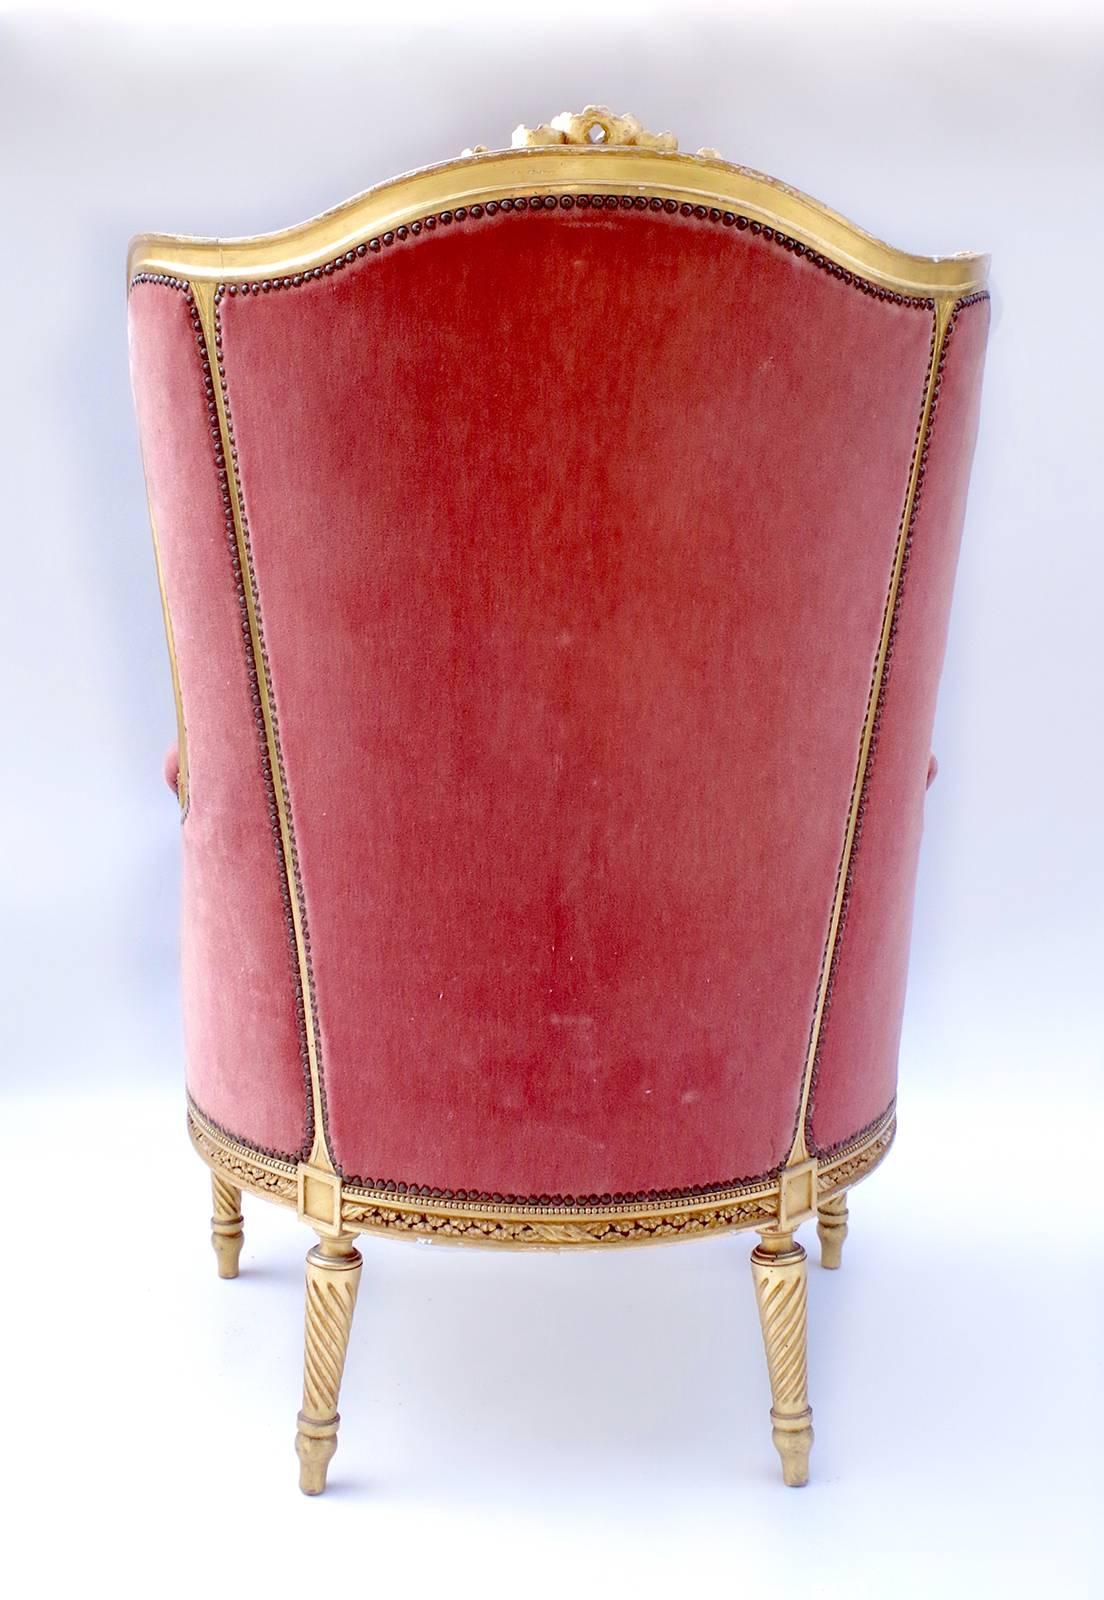 Large transition Louis XV / Louis XVI style cabriolet wing chair. Moulded, sculpted and giltwood model, standing on four tapered and fluted legs. The apron, the arm-rests, the uprights are decorated by flowers, ribbons and acanthus leaves. Red